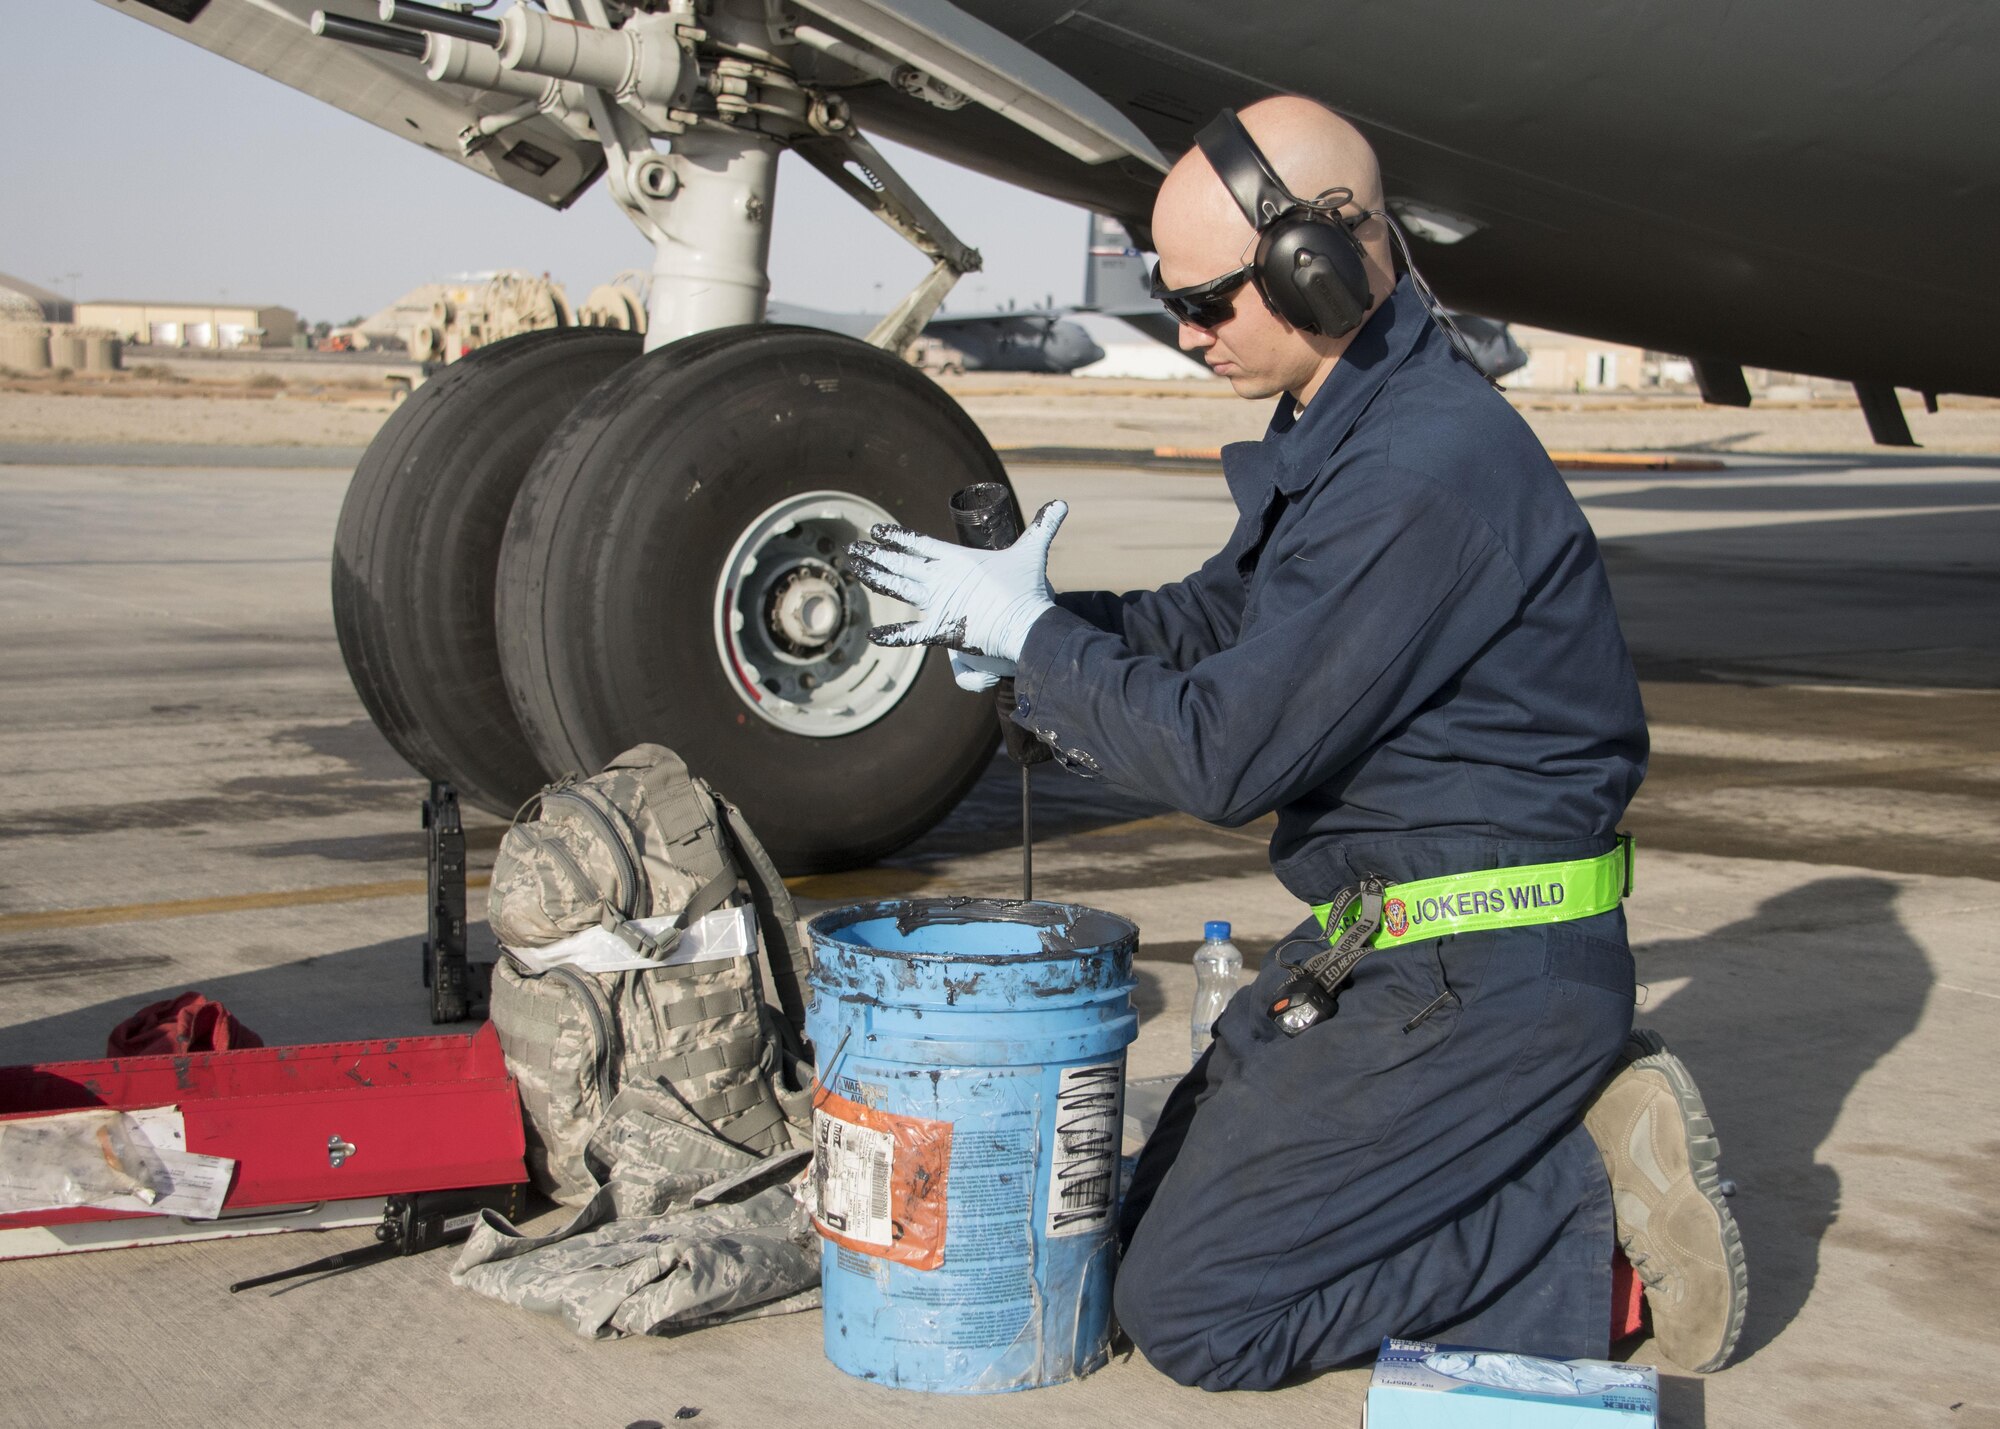 Tech. Sgt. Devon Edwards, a 5th Expeditionary Air Mobility Squadron aerospace maintenance craftsman, fills a grease gun at an undisclosed location in Southwest Asia Jan. 13, 2017. During post-flight inspections of the C-17 Globemaster IIIs, 5th EAMS Airmen grease approximately 200 points around the aircraft. (U.S. Air Force photo/Senior Airman Andrew Park)